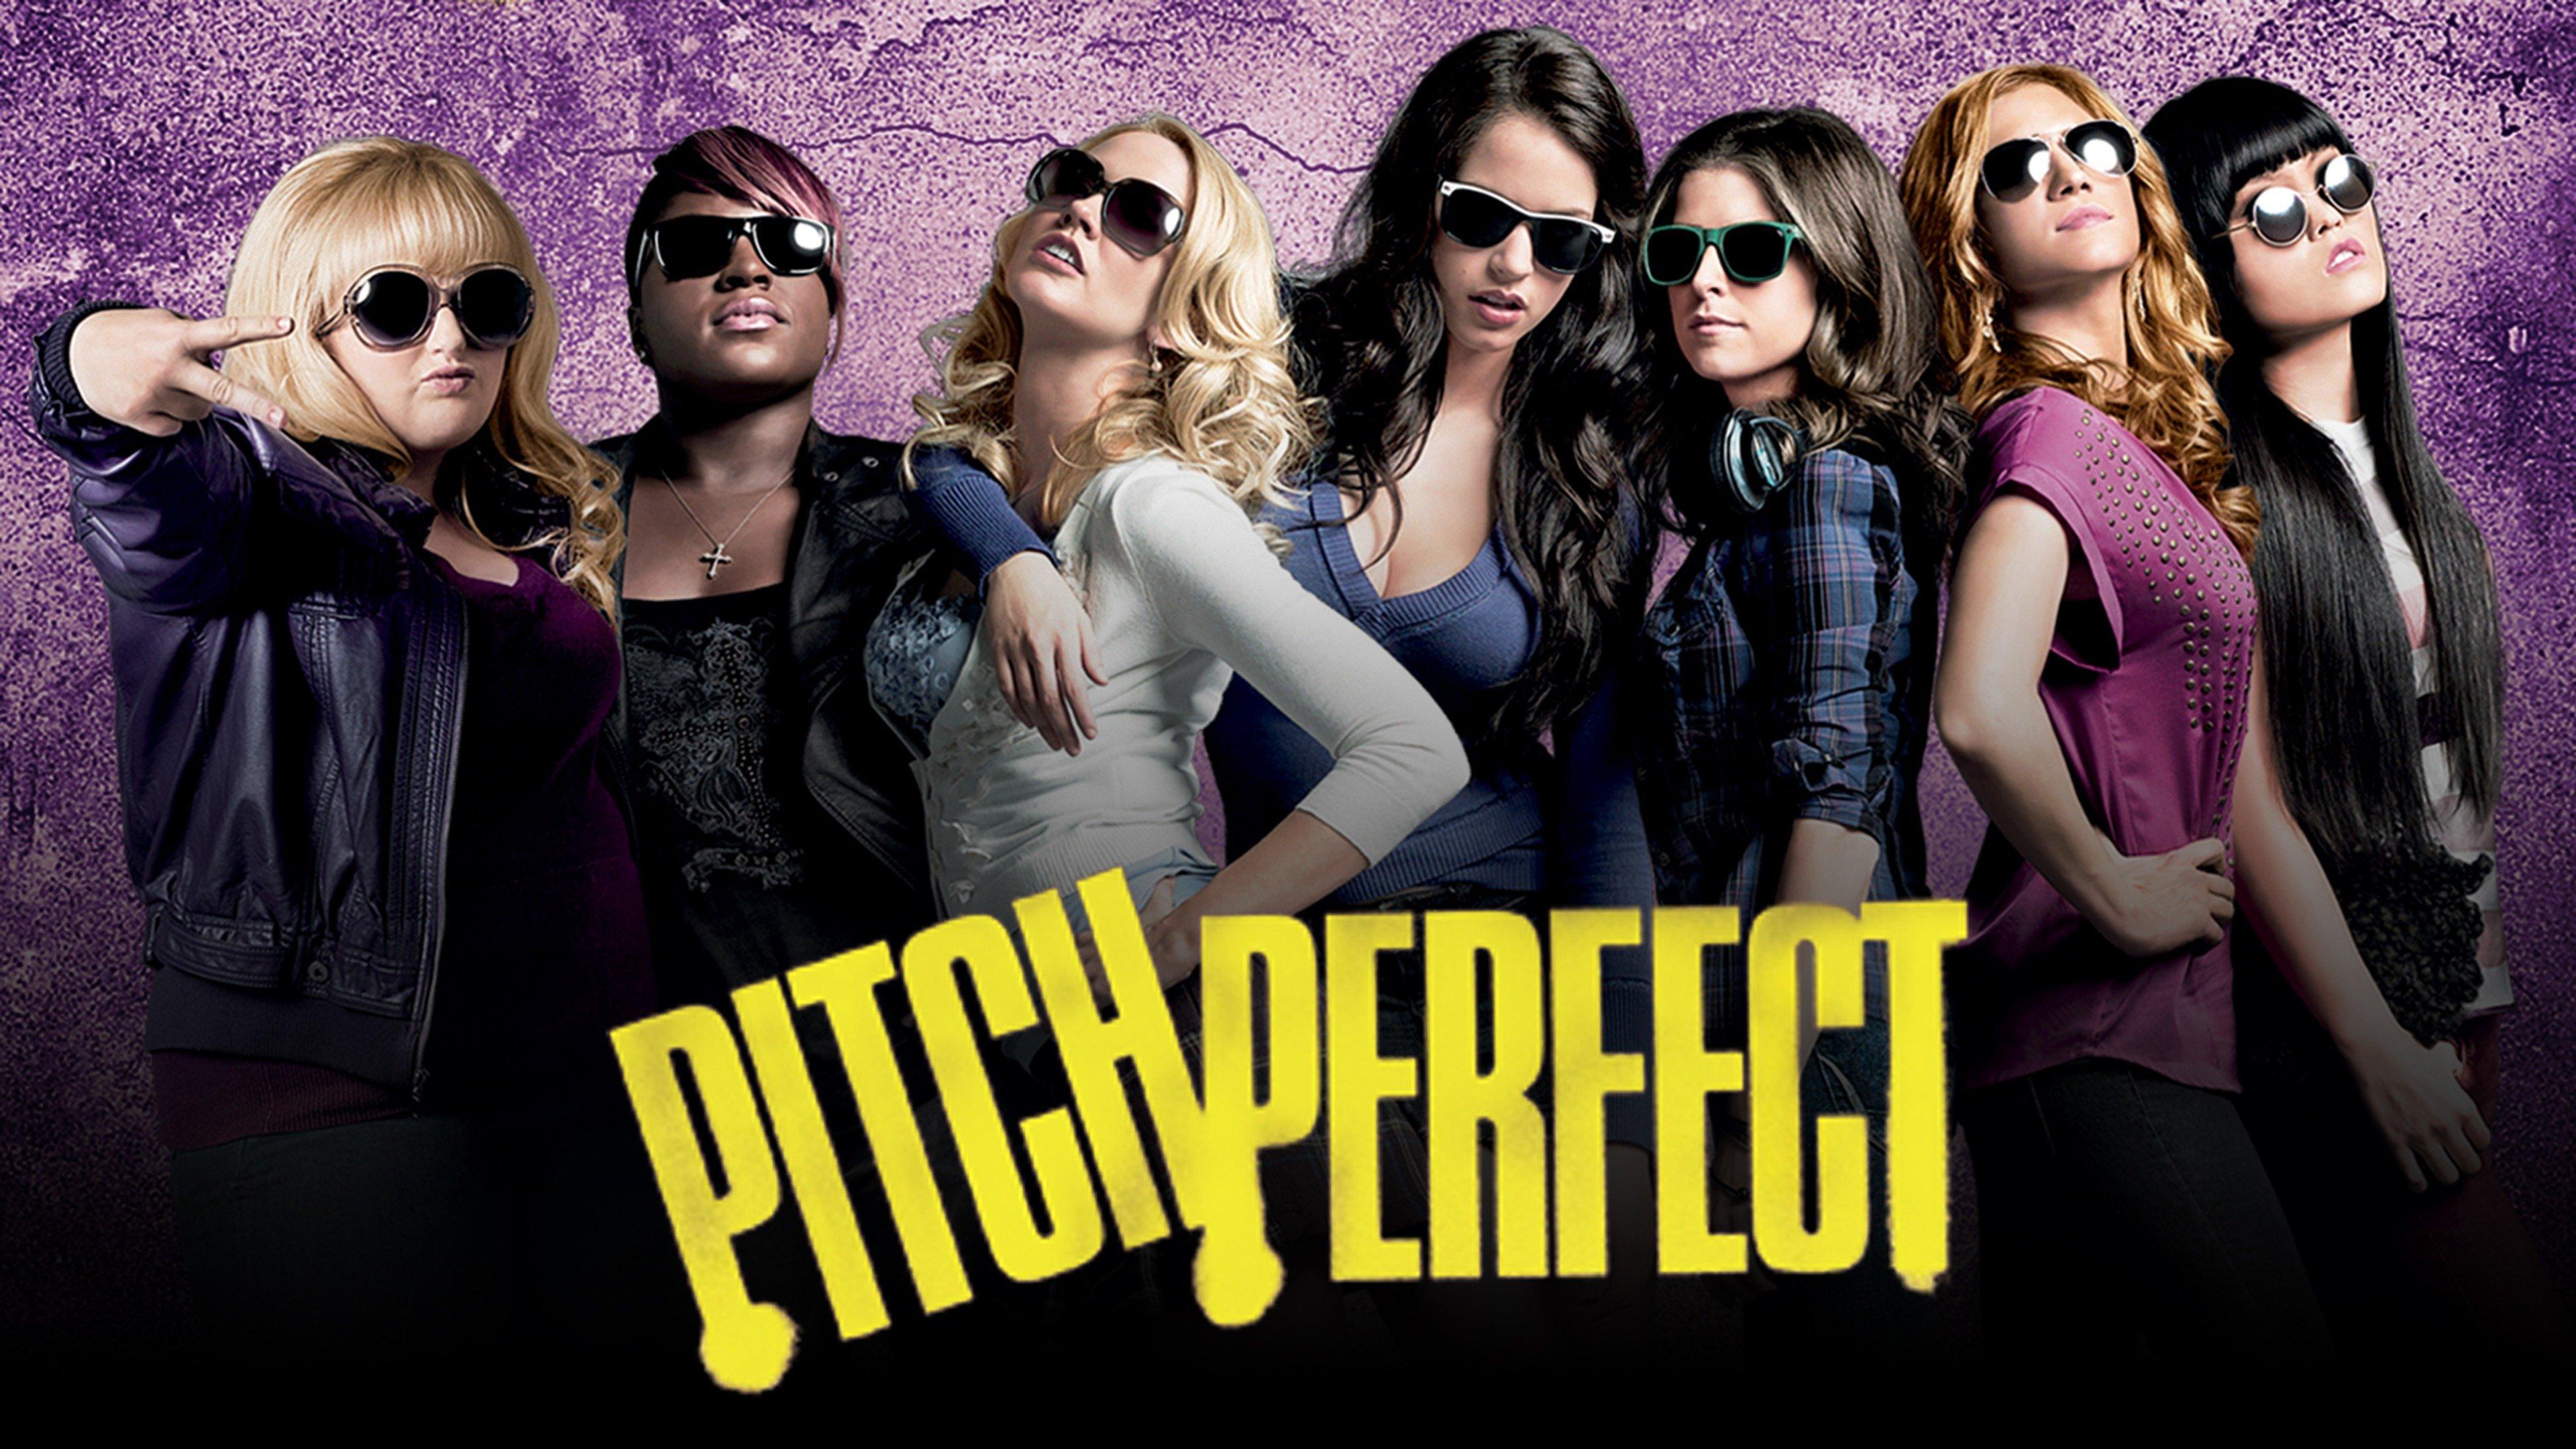 Watch Pitch Perfect Streaming Online on Philo (Free Trial)